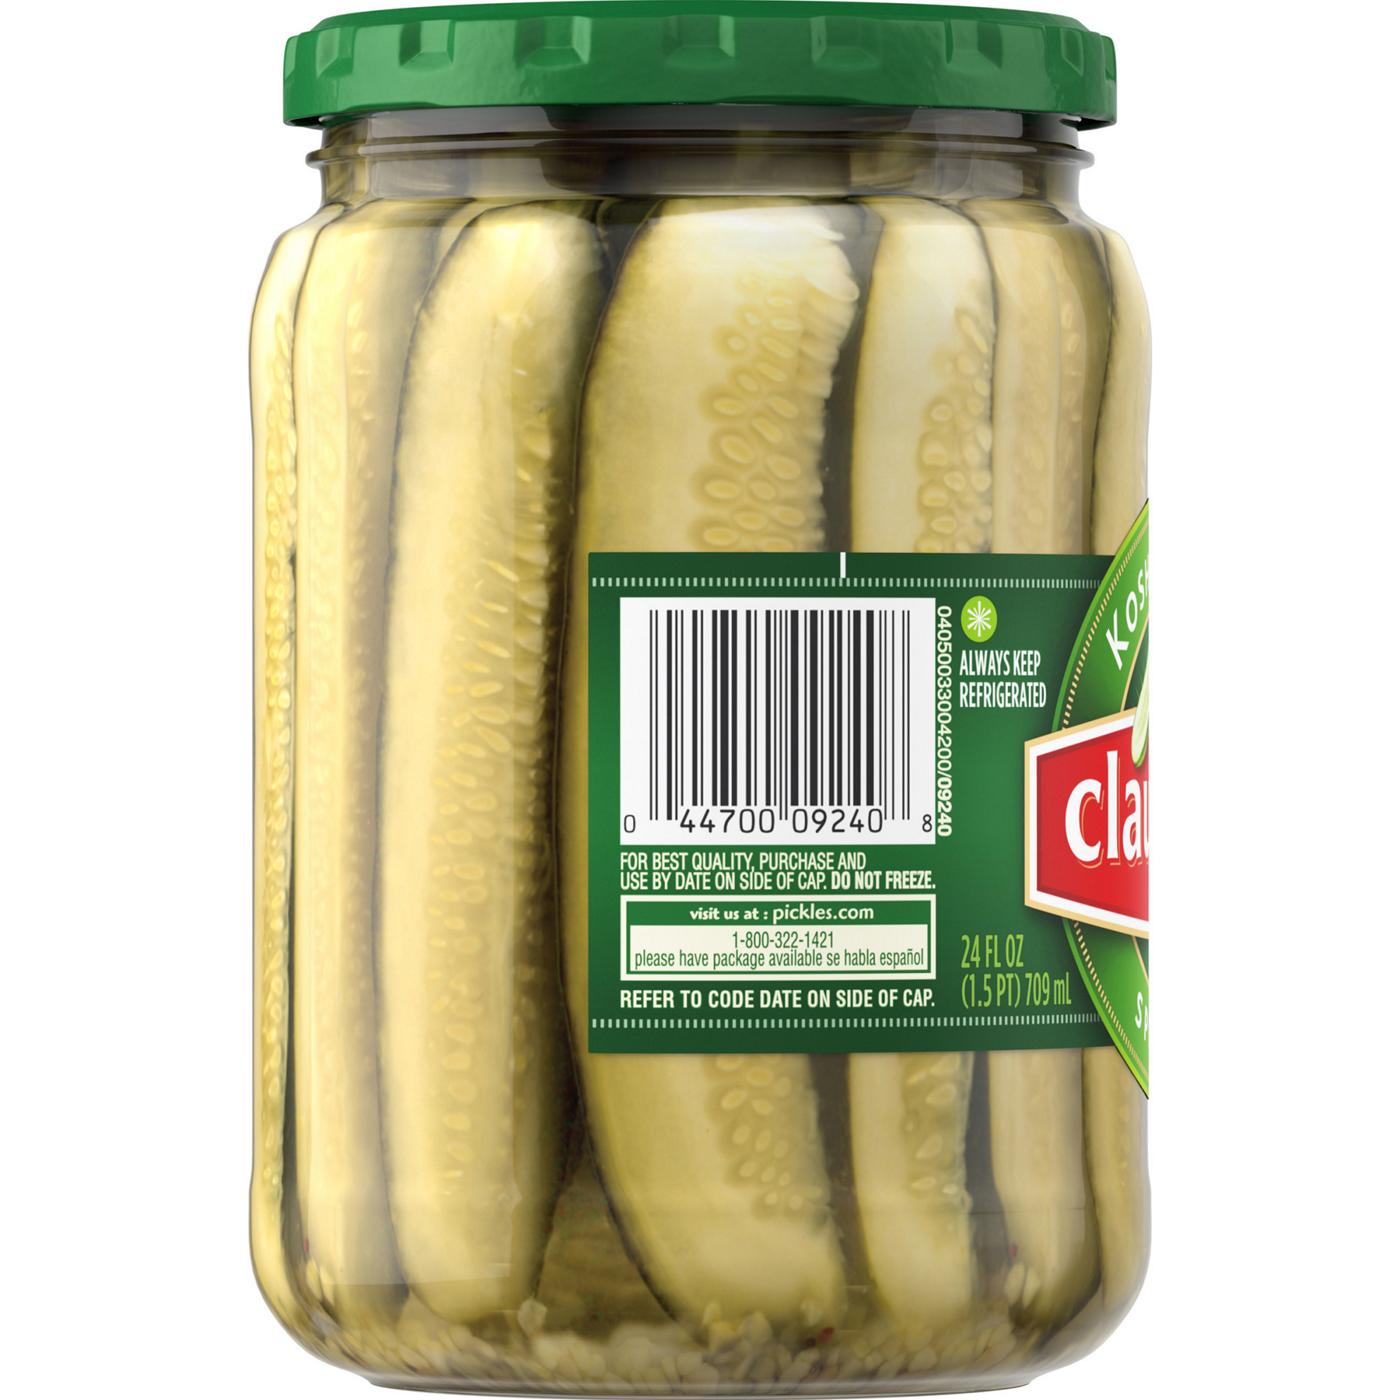 Claussen Kosher Dill Spears; image 2 of 9